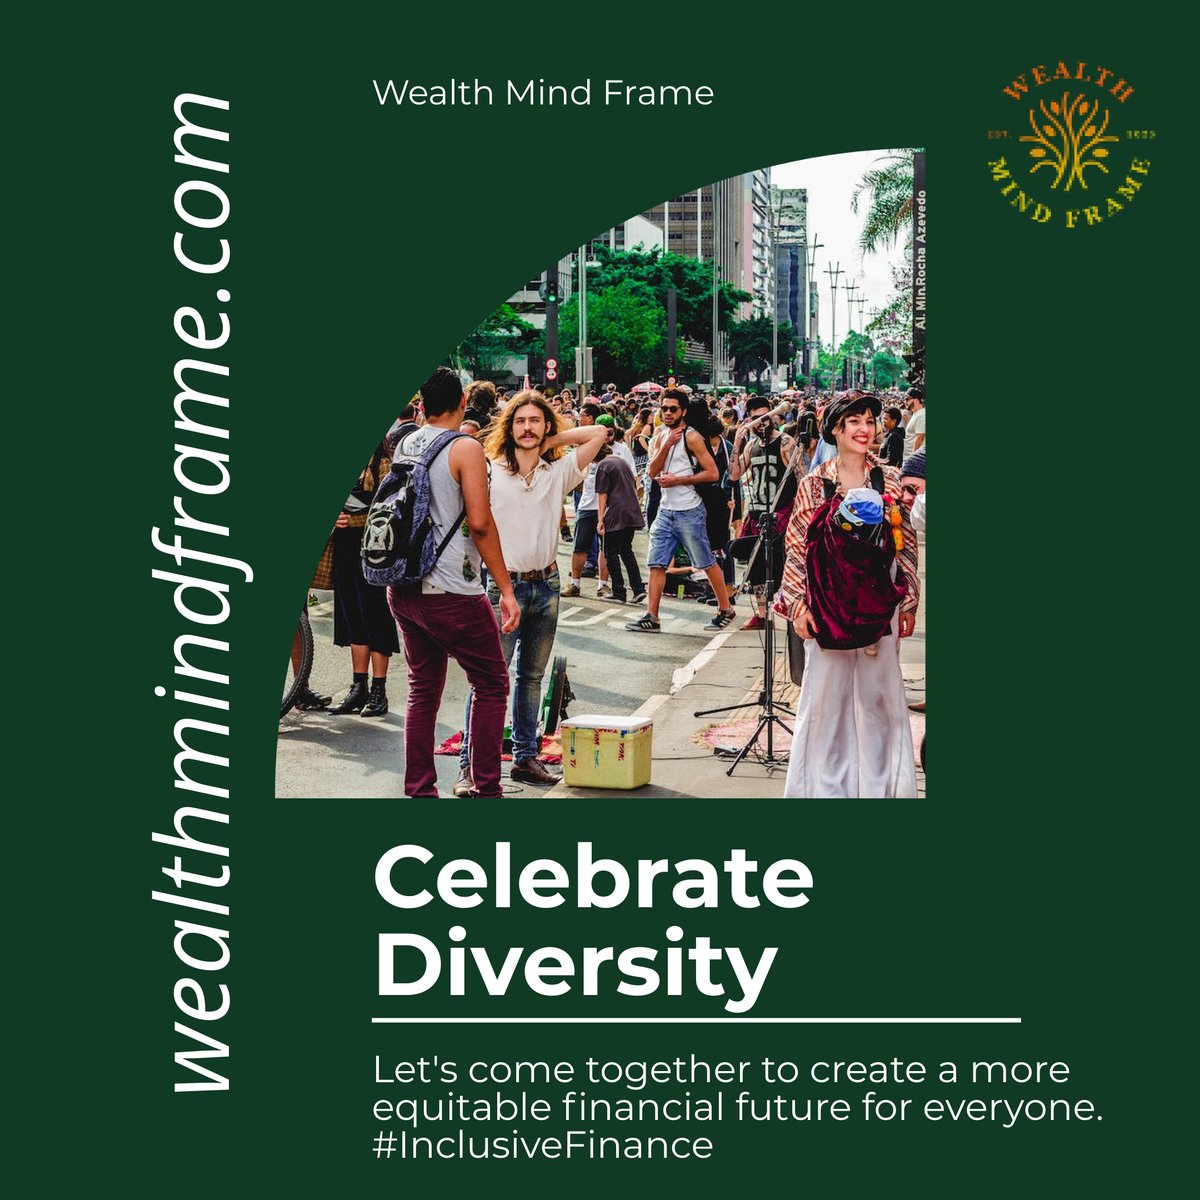 Diversity and inclusivity are key in building wealth for all. Let's celebrate our differences and come together to create a more equitable financial future for everyone. #WealthMindFrame #InclusiveFinance #CelebrateDiversity